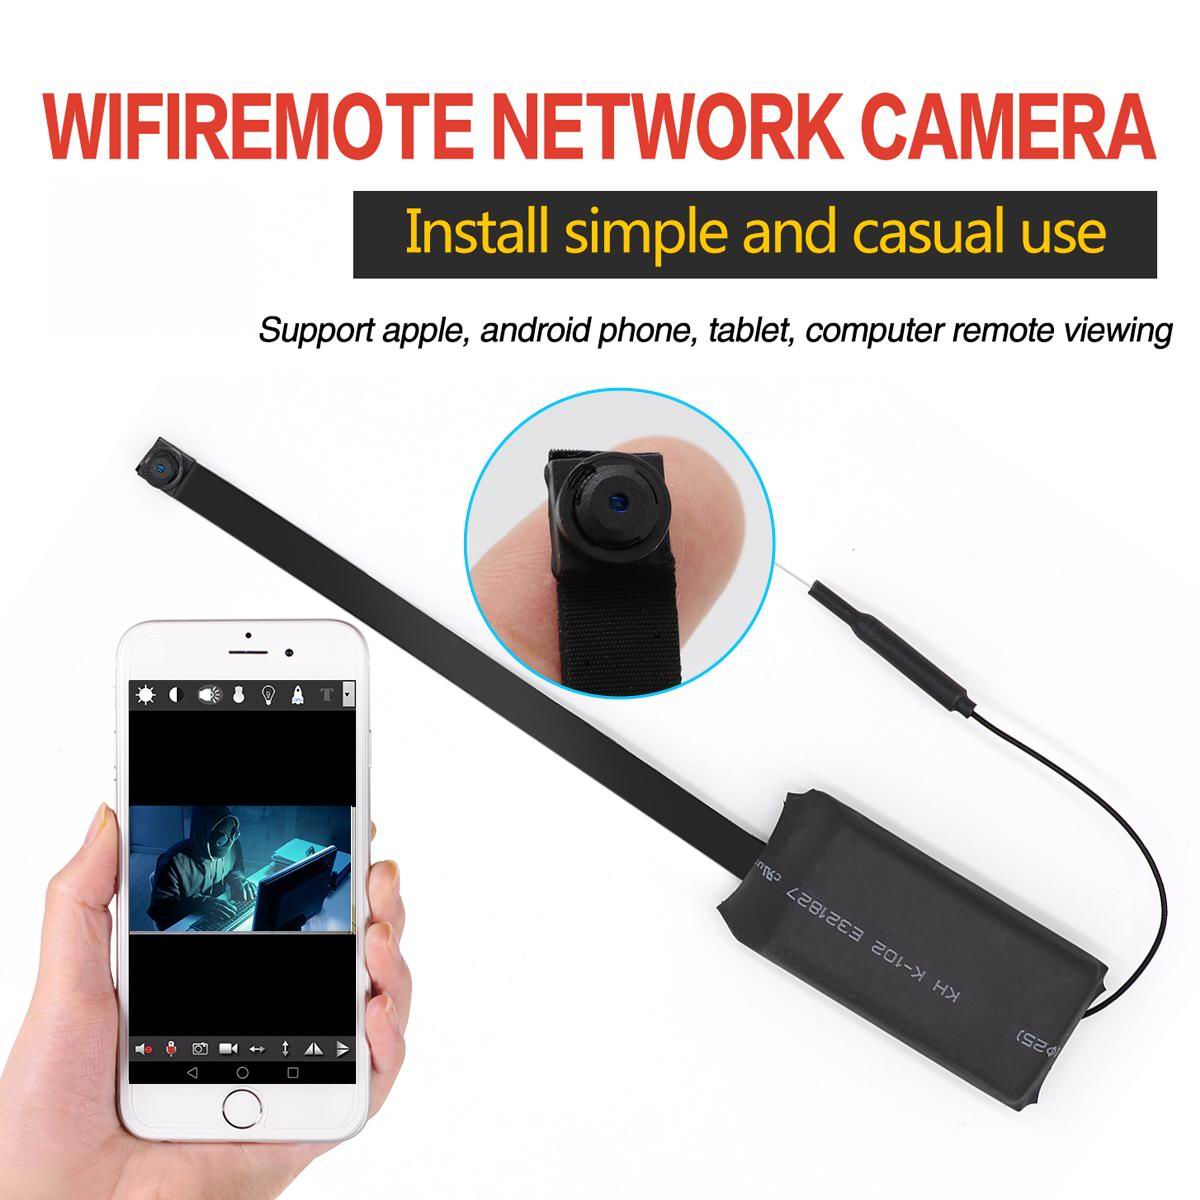 Z9S HD WIFI Network P2P Mini Camera Motion Detection Activated Camcorder Cloud Storage APP Remote Viewing DIY Camera Module for Home Office Security